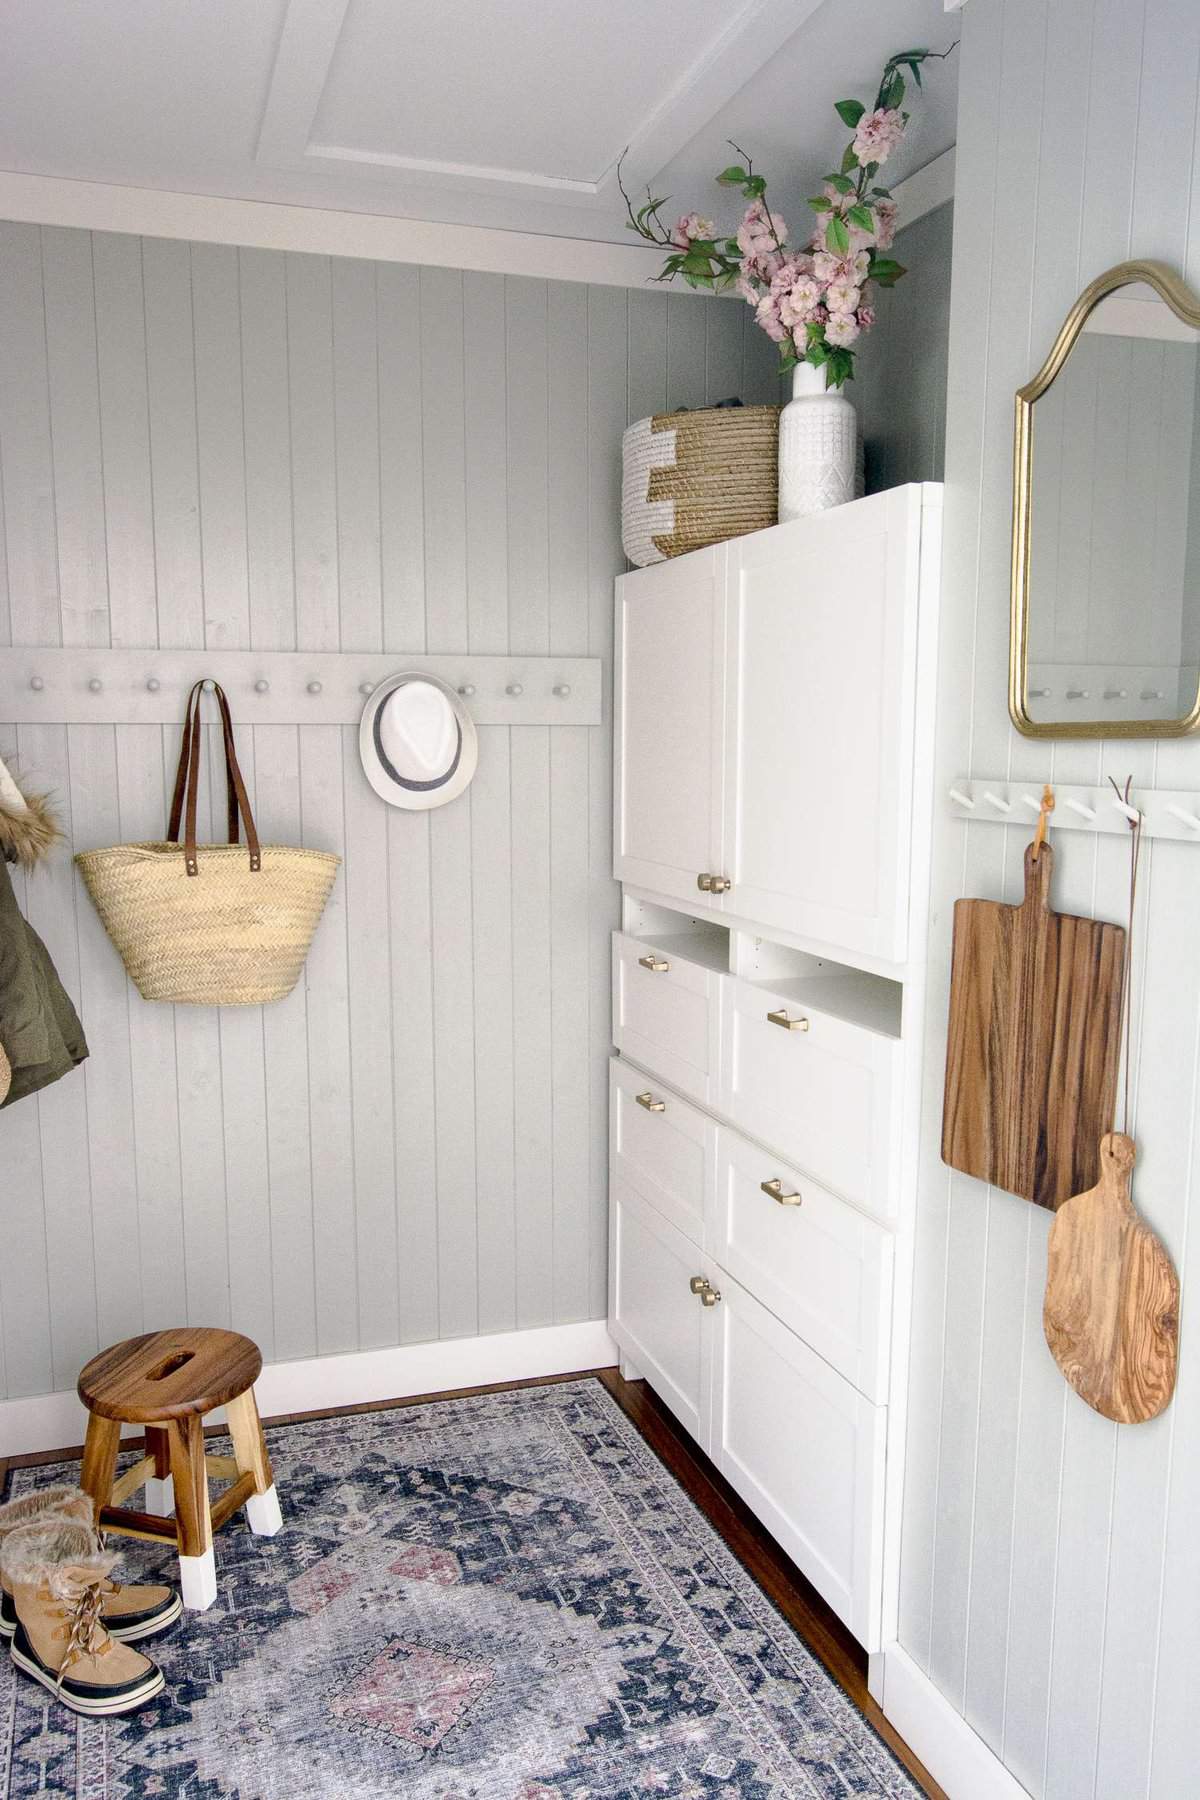 Do you need more mudroom storage but lack the space & budget? This mudroom built in hack added tons of storage and saved $2,000 instead of a custom cabinet!